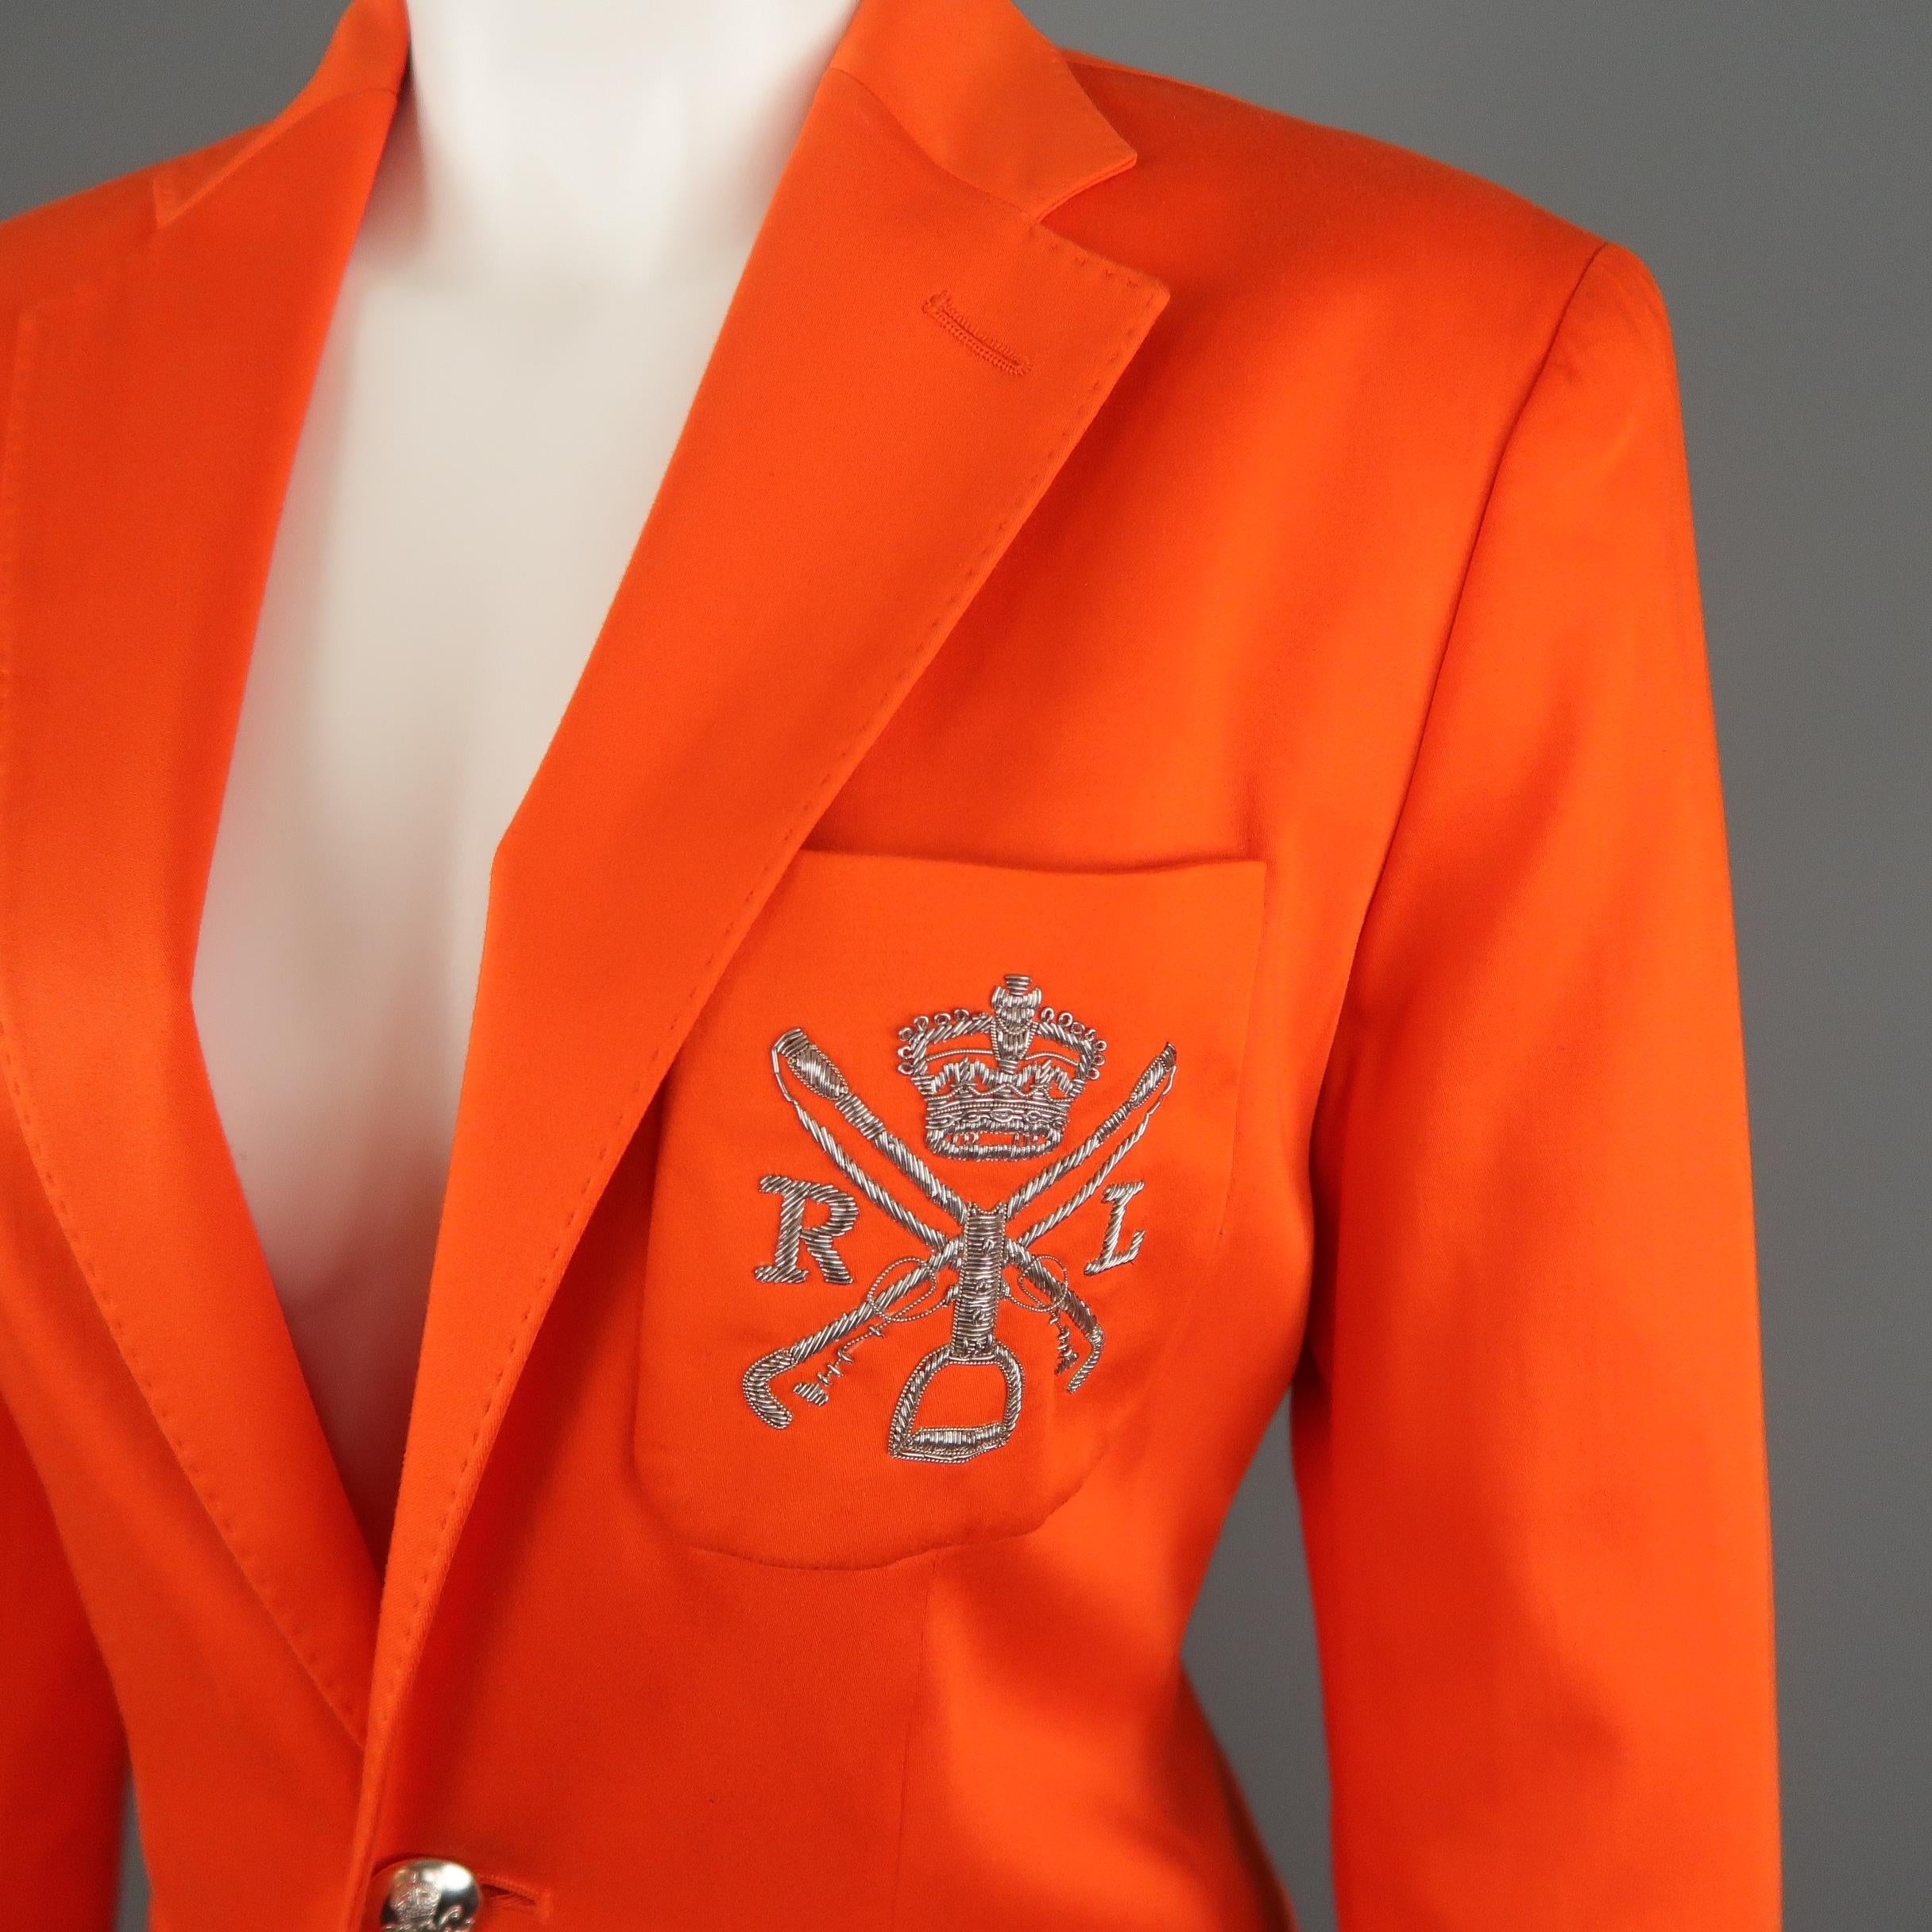 BLUE LABEL by RALPH LAUREN blazer jacket comes in bold orange cotton with a notch lapel, top stitching, patch flap pockets, silver tone metal crown buttons, and breast pocket with silver tone metal crest embroidery.
 
Excellent Pre-Owned